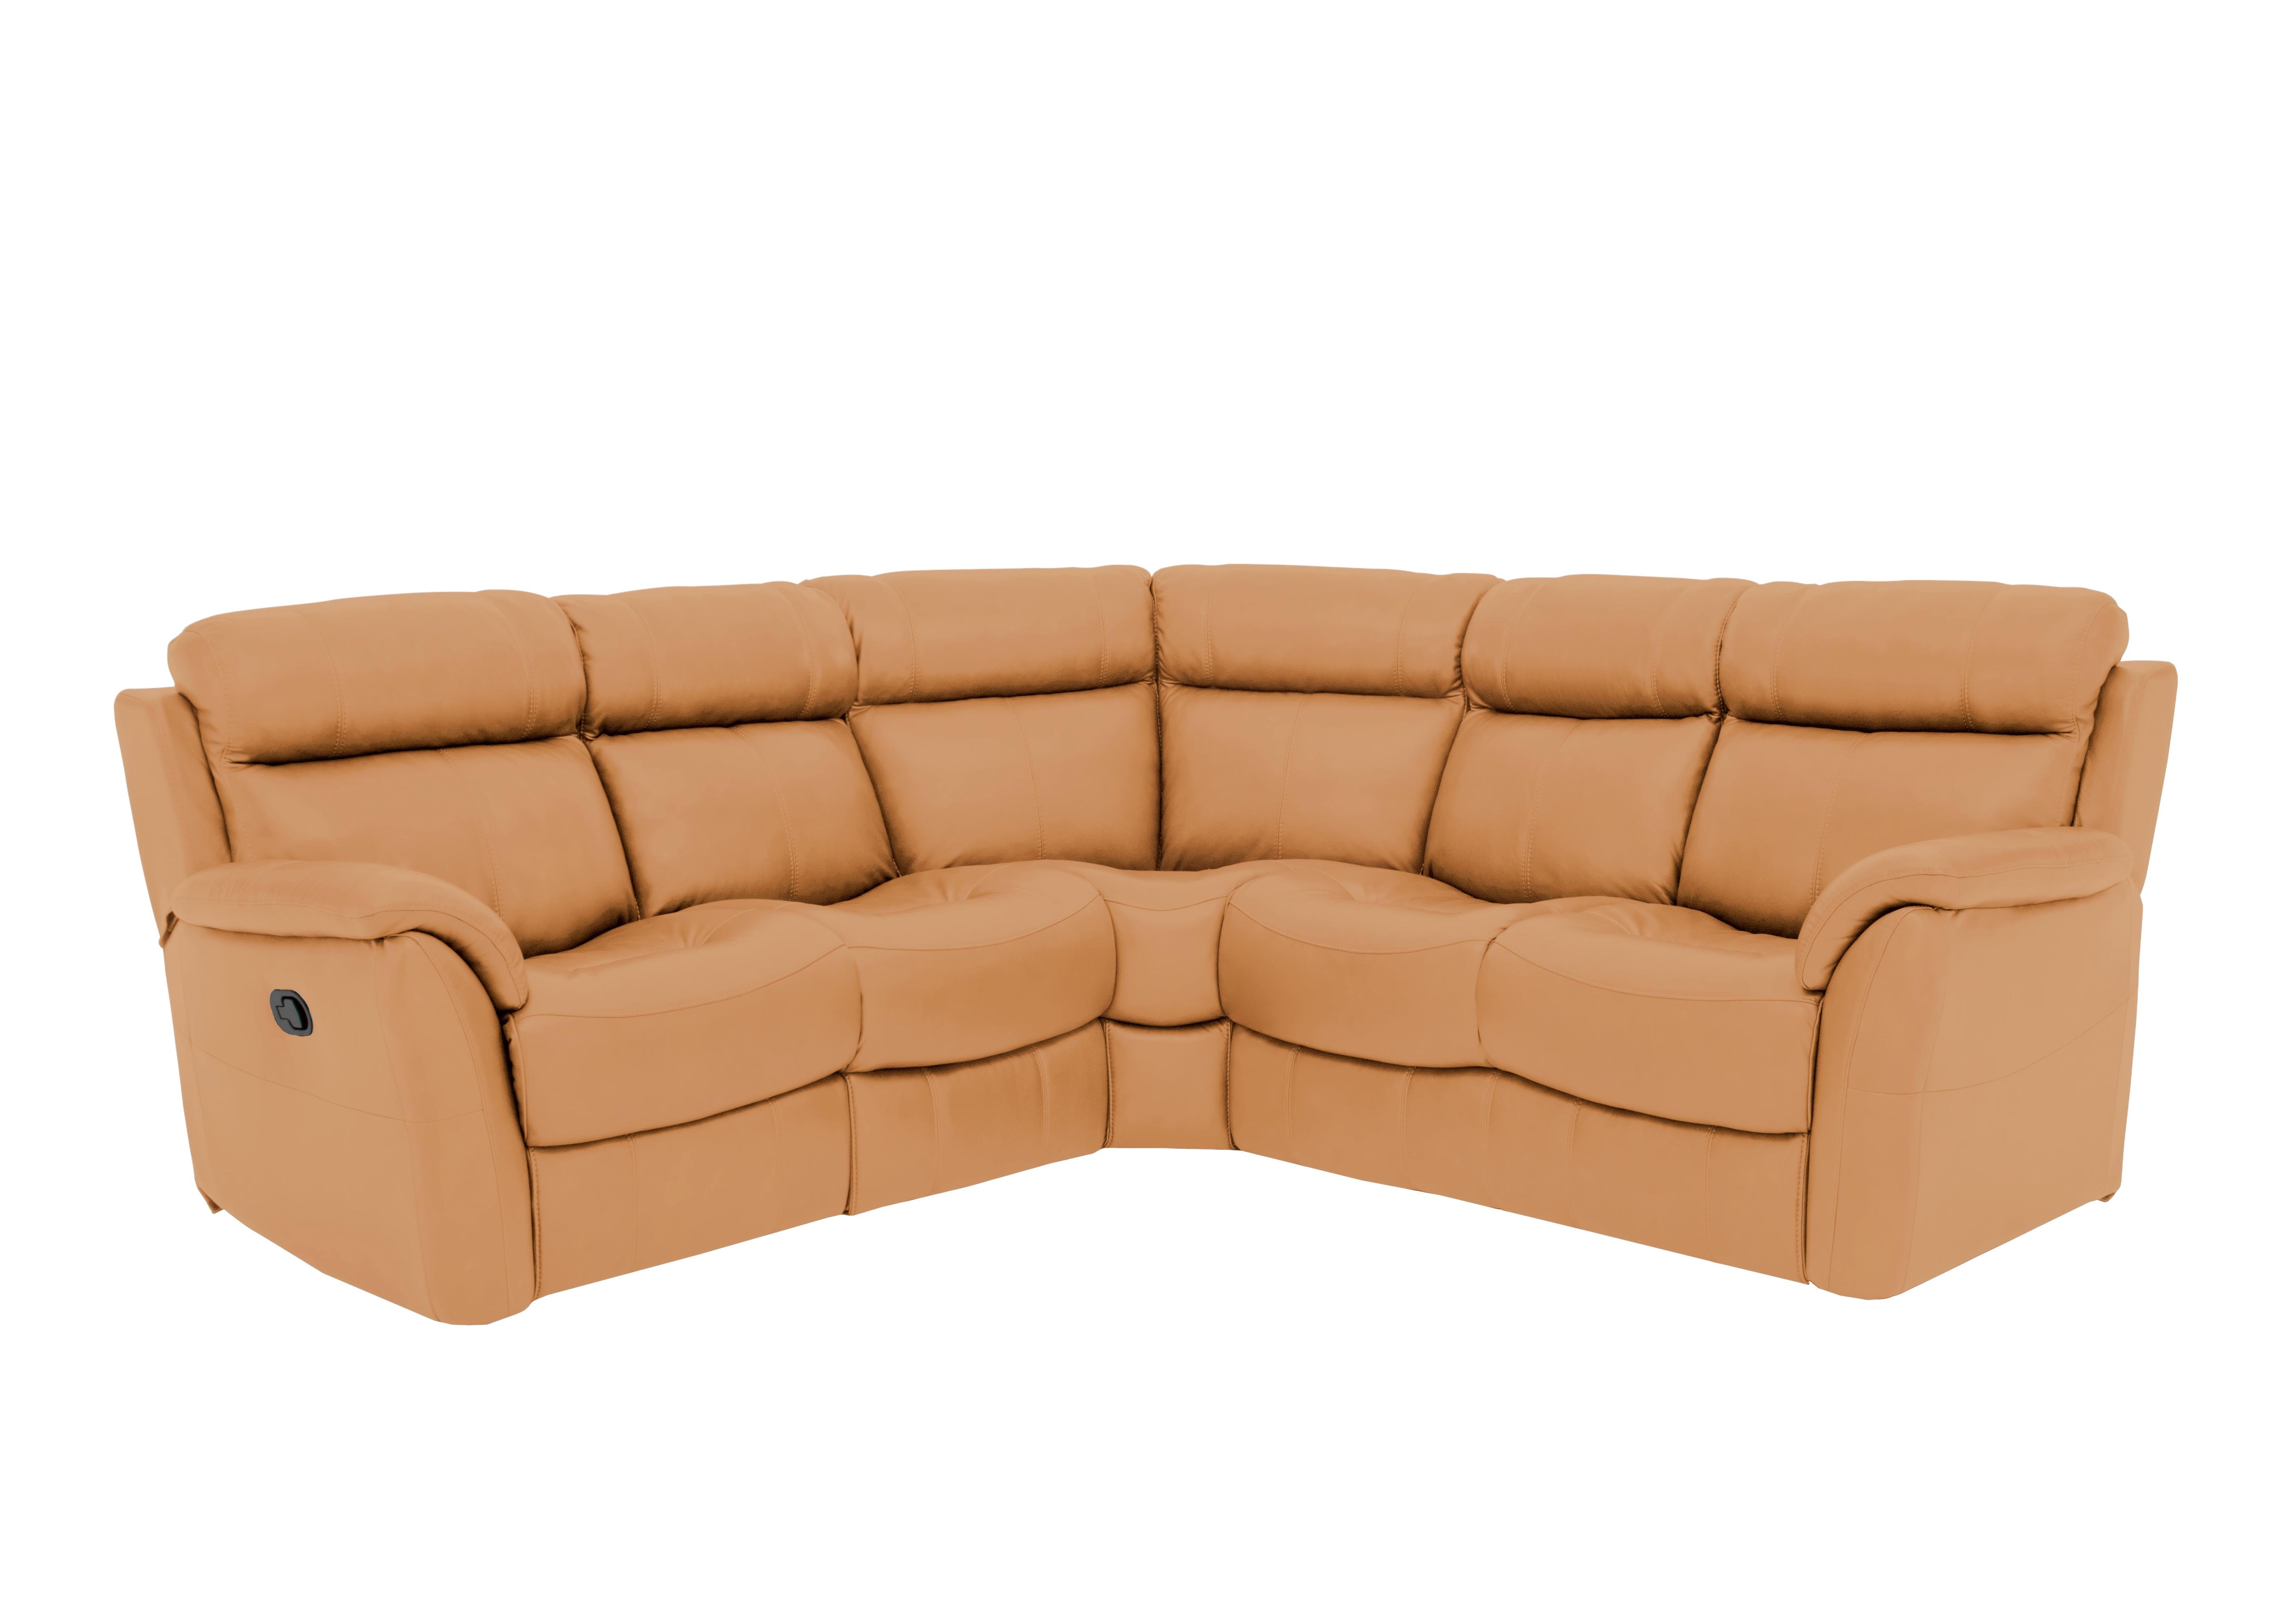 Relax Station Revive Leather Corner Sofa in Bv-335e Honey Yellow on Furniture Village